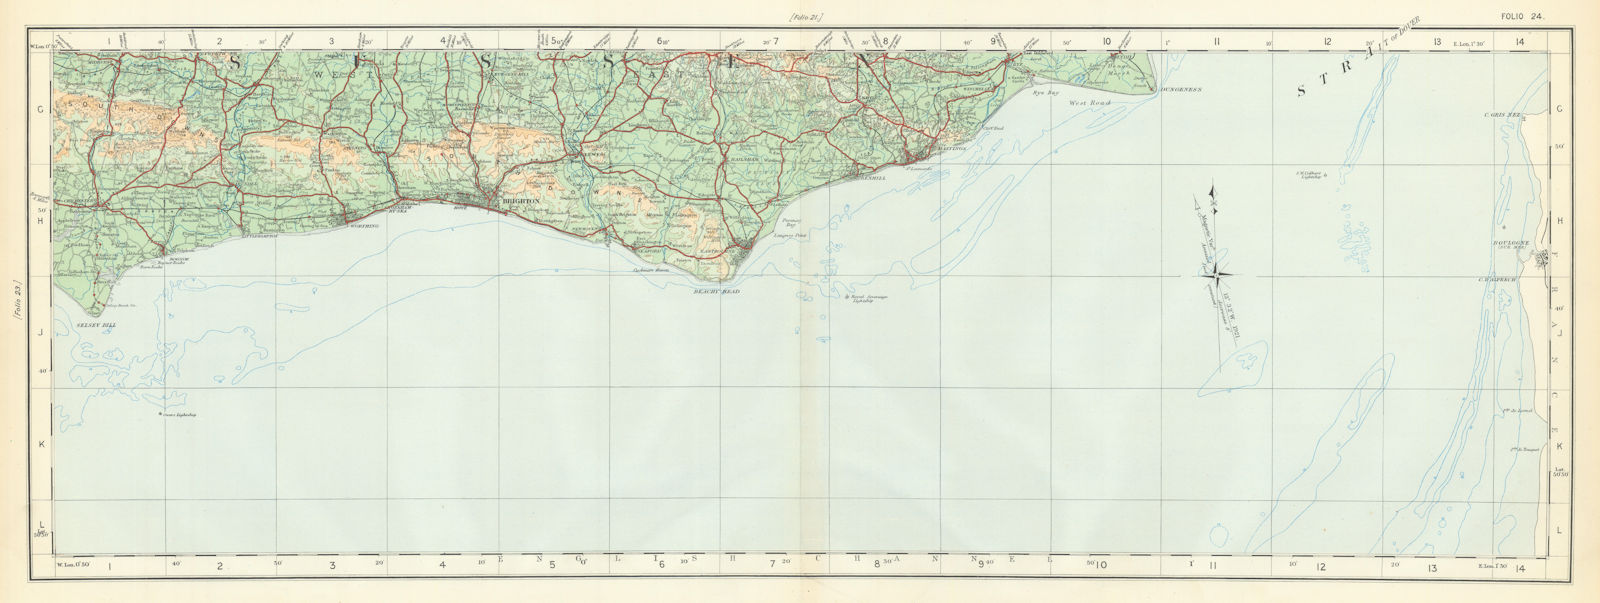 Sussex coast & South Downs. Brighton Worthing Hastings ORDNANCE SURVEY 1922 map